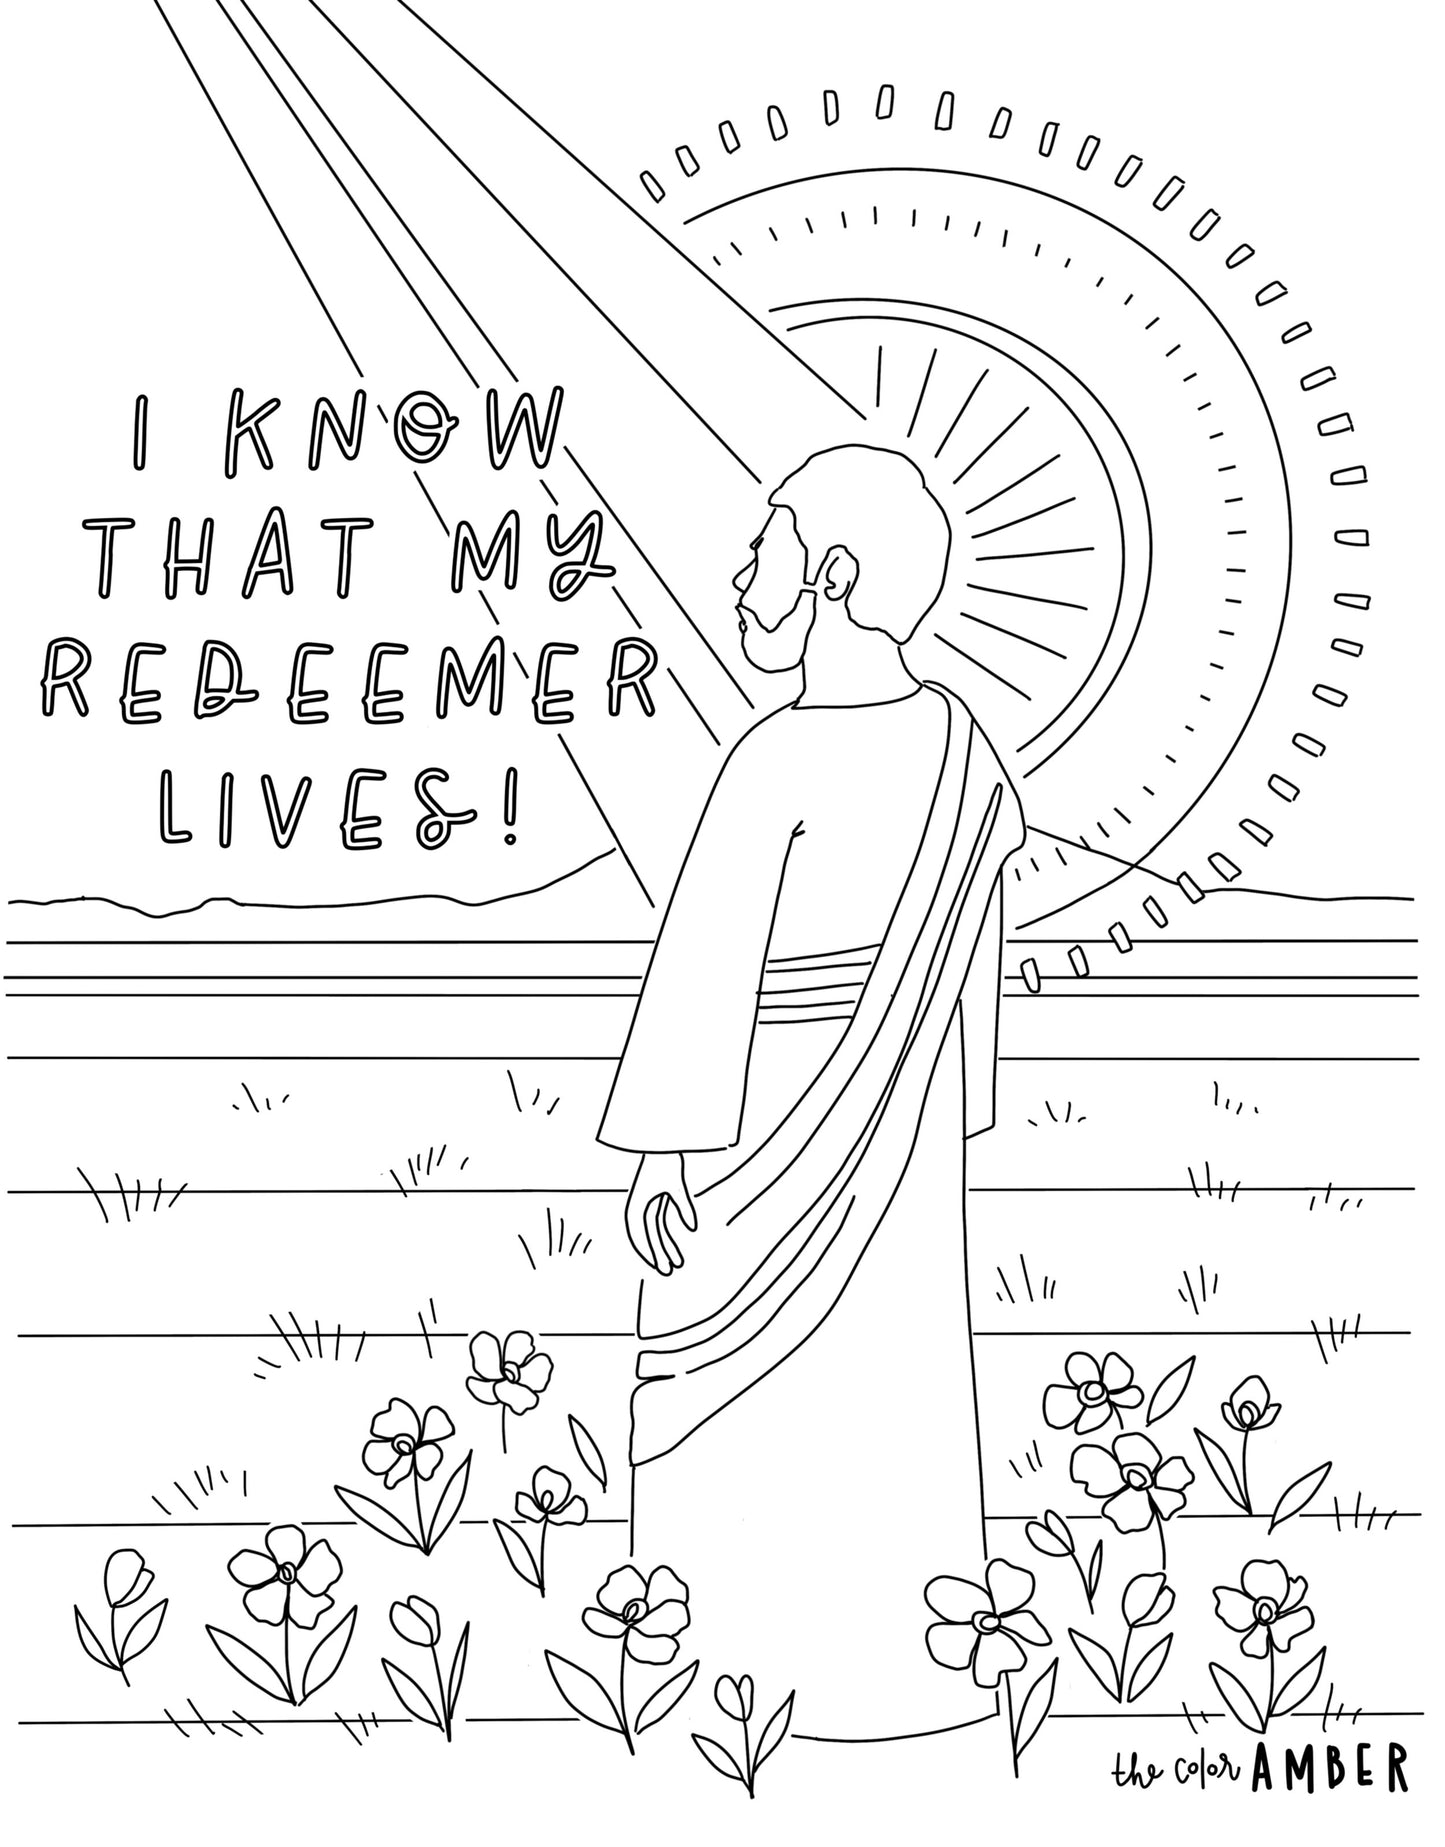 Spring 2021 - Free Coloring Pages